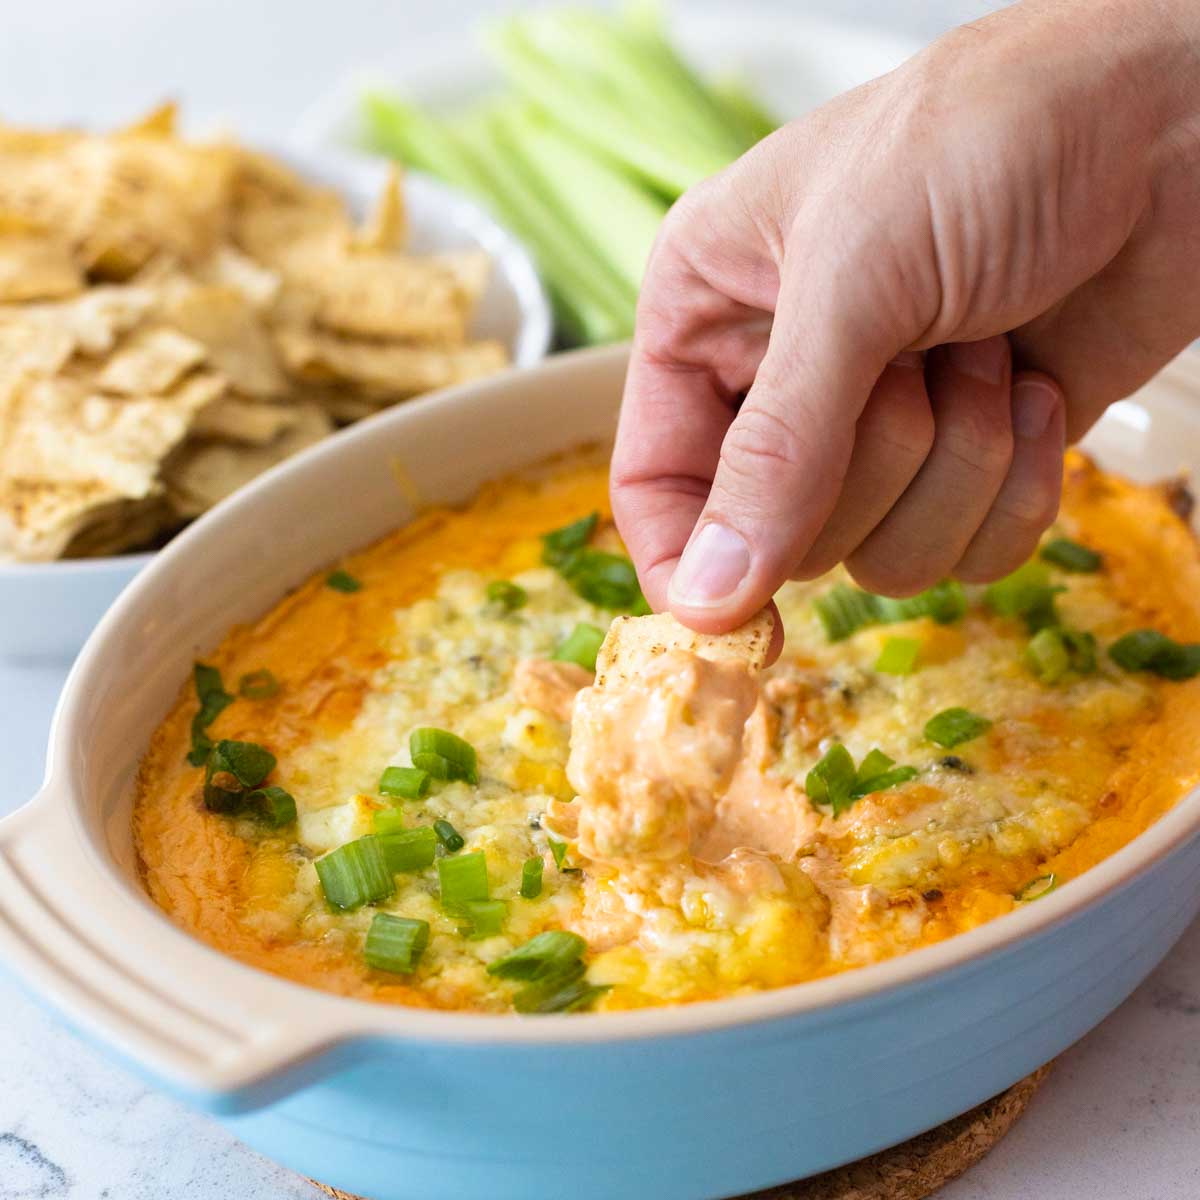 A man's hand is dipping a tortilla chip into the buffalo chicken dip.